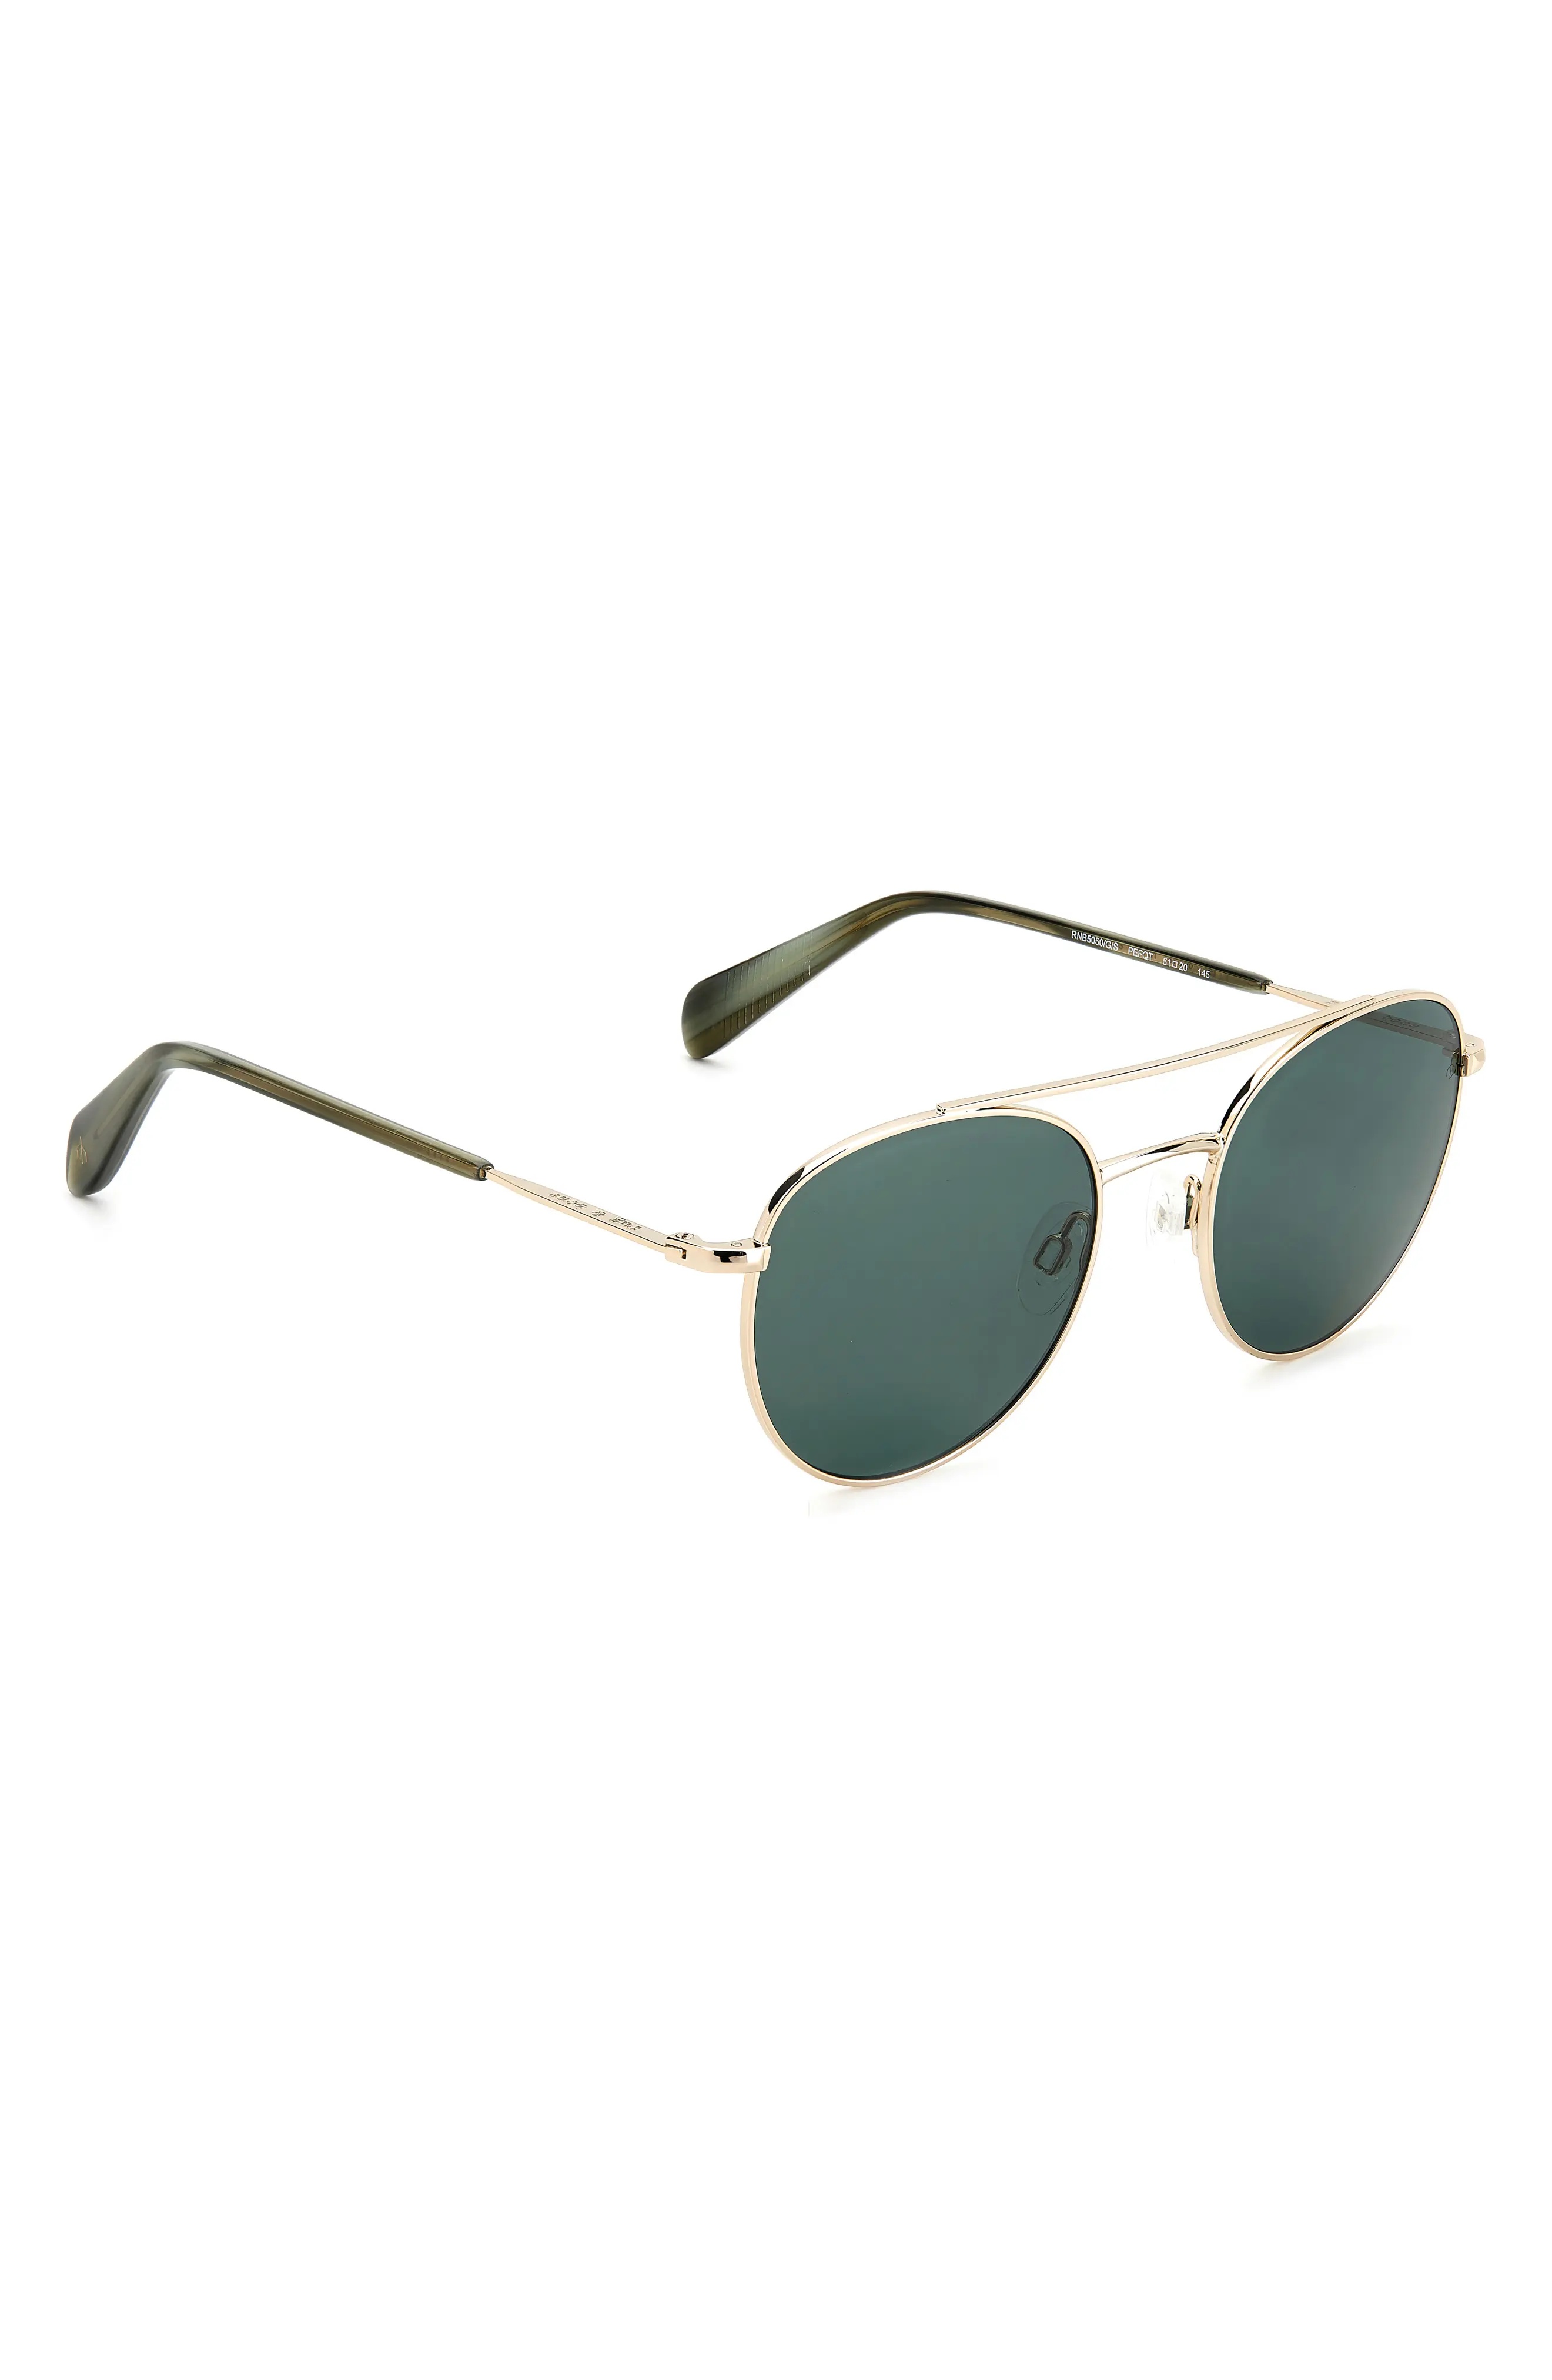 51mm Round Sunglasses in Gold Green/Green - 4